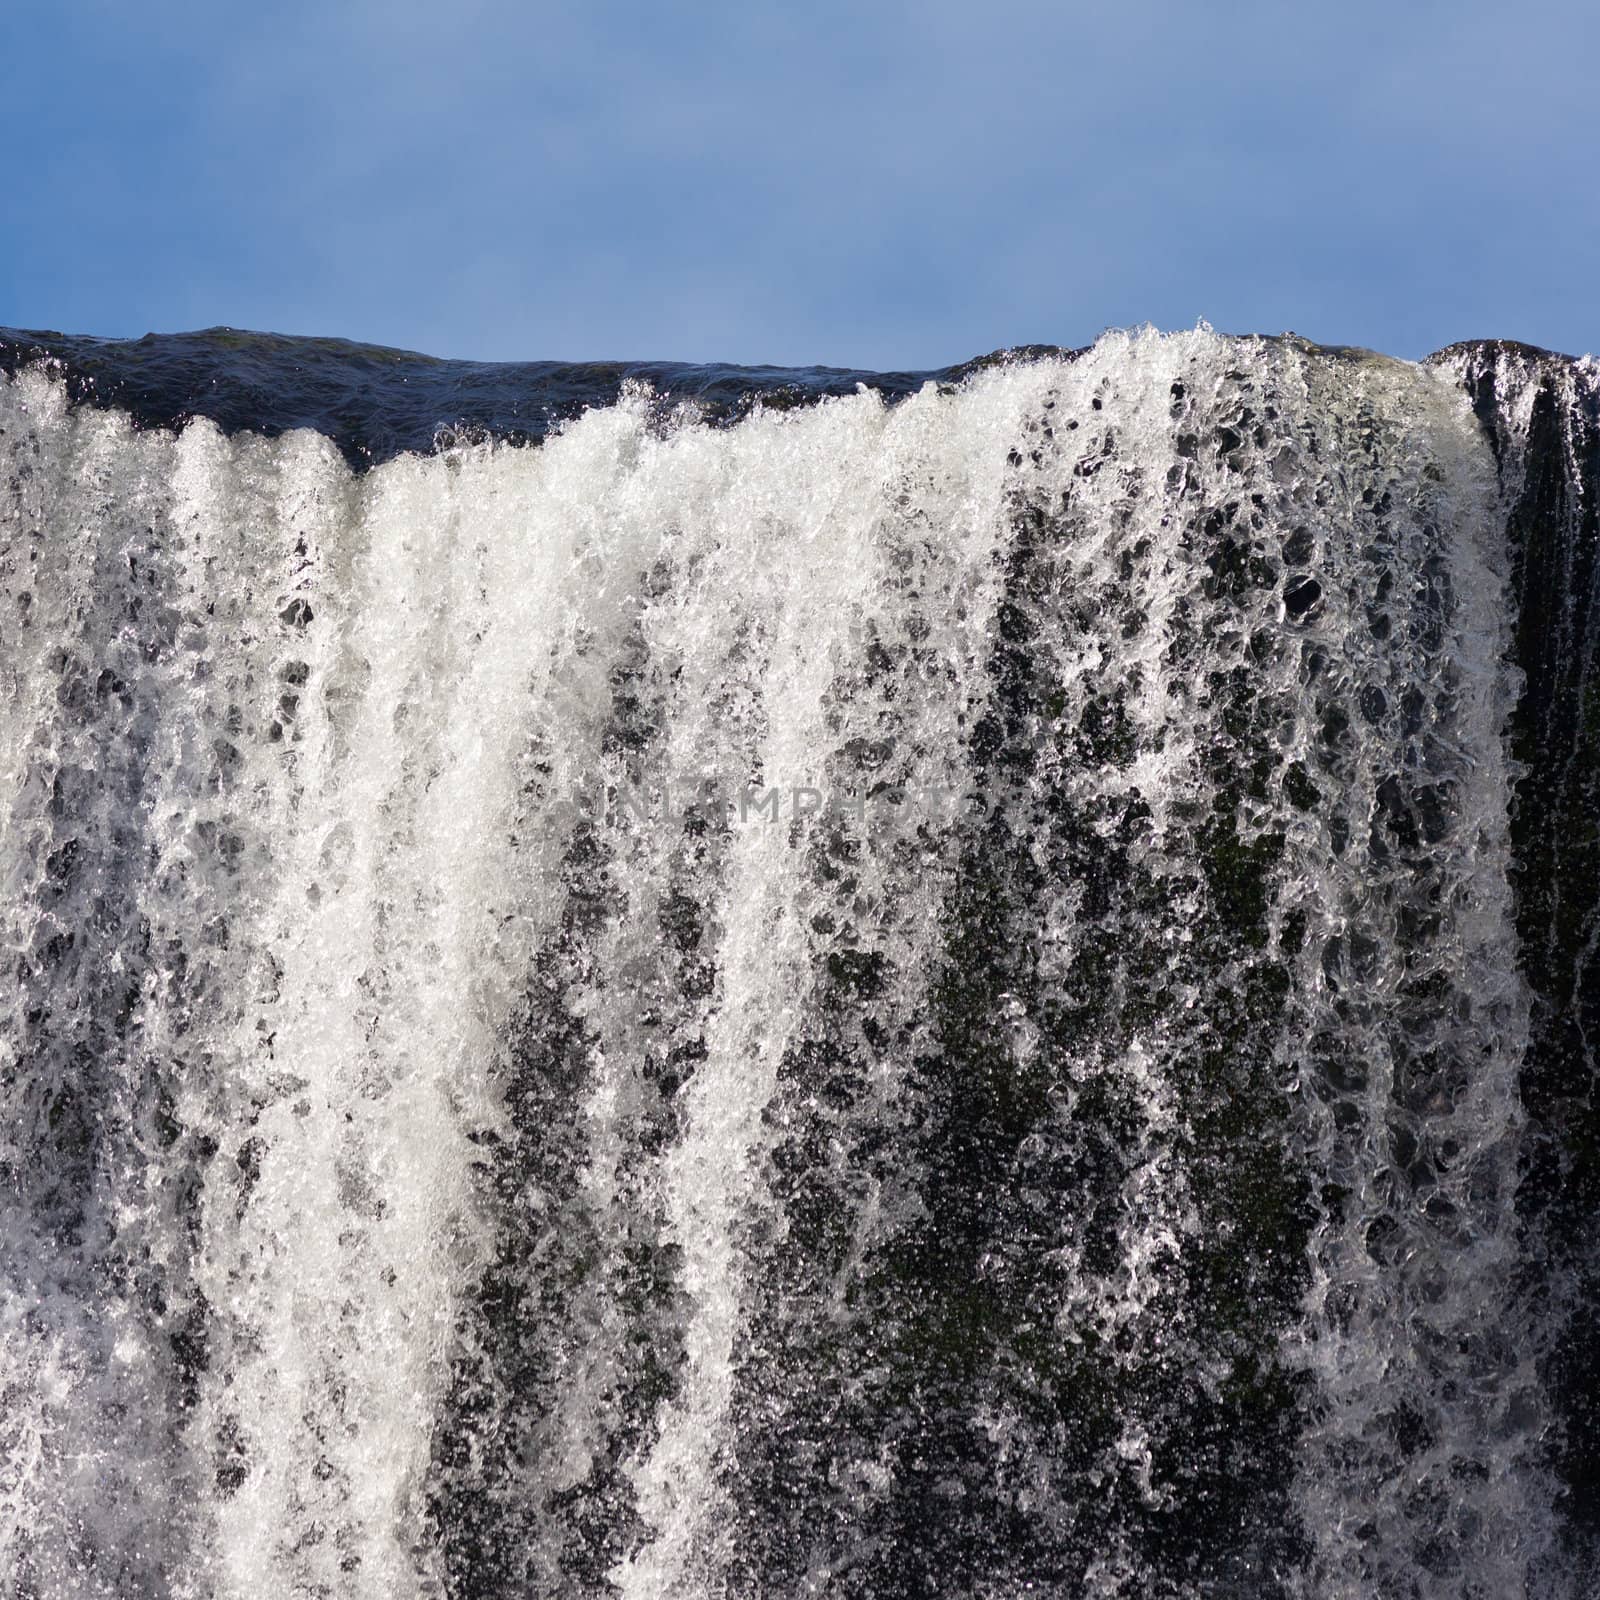 Water cascading over rock edge forming a waterfall by PiLens